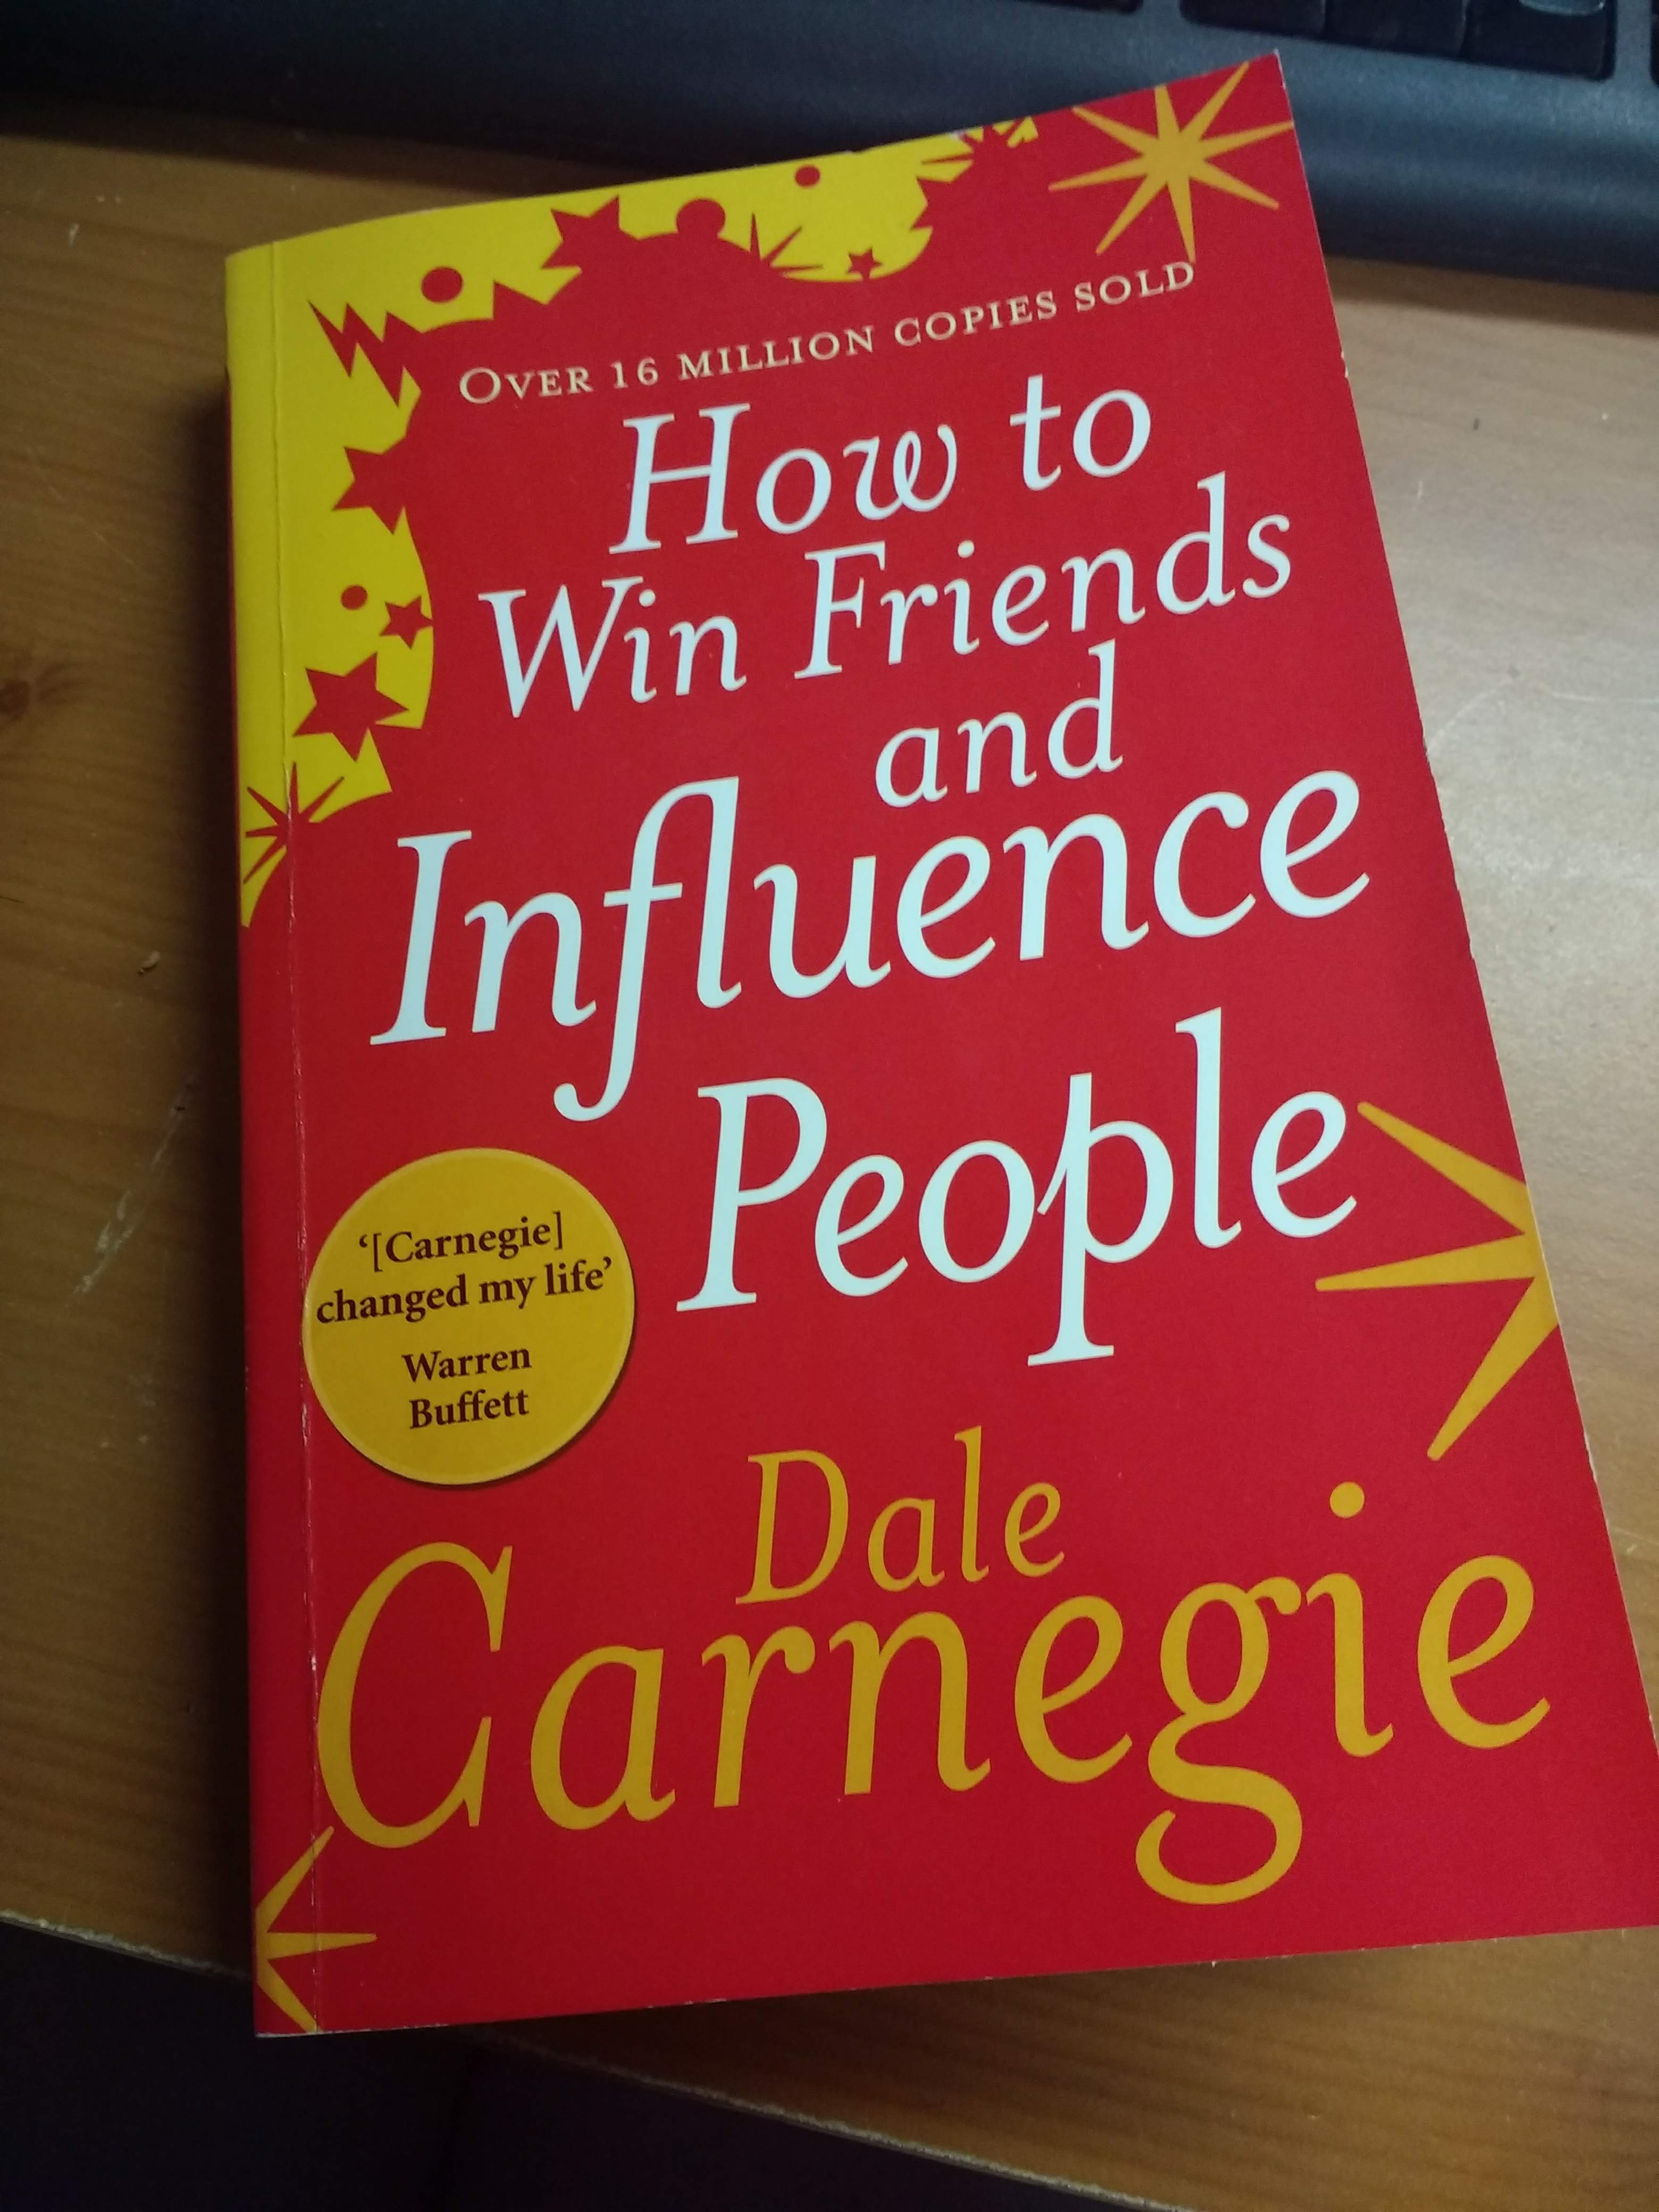 How to Win Friends and Influence People download the new version